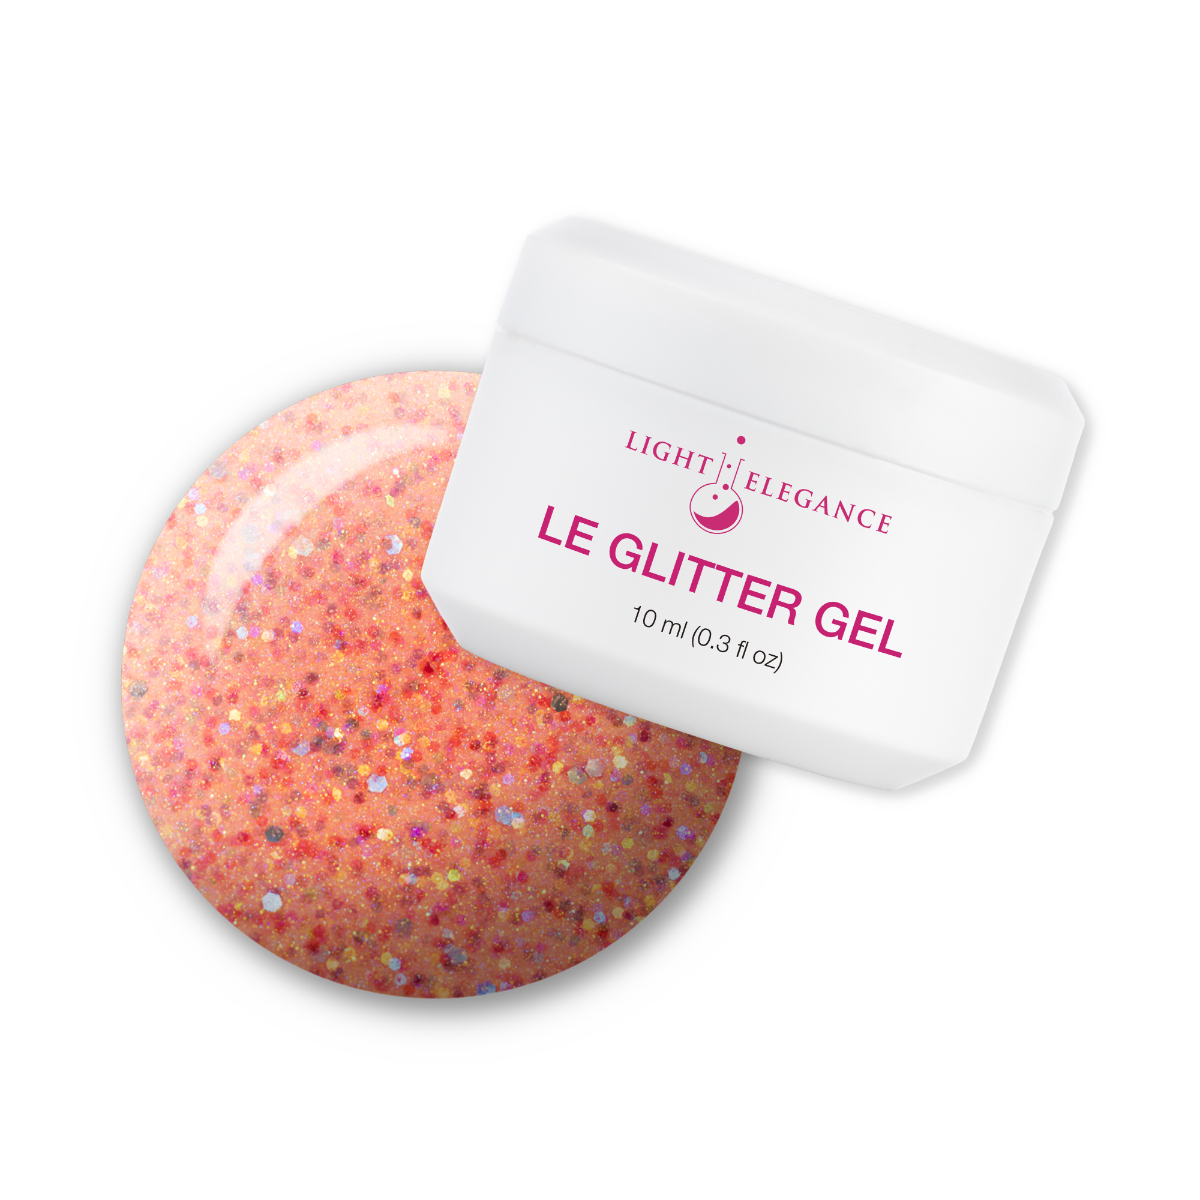 Light Elegance Glitter Gel - I Need Some Space :: New Packaging - Creata Beauty - Professional Beauty Products